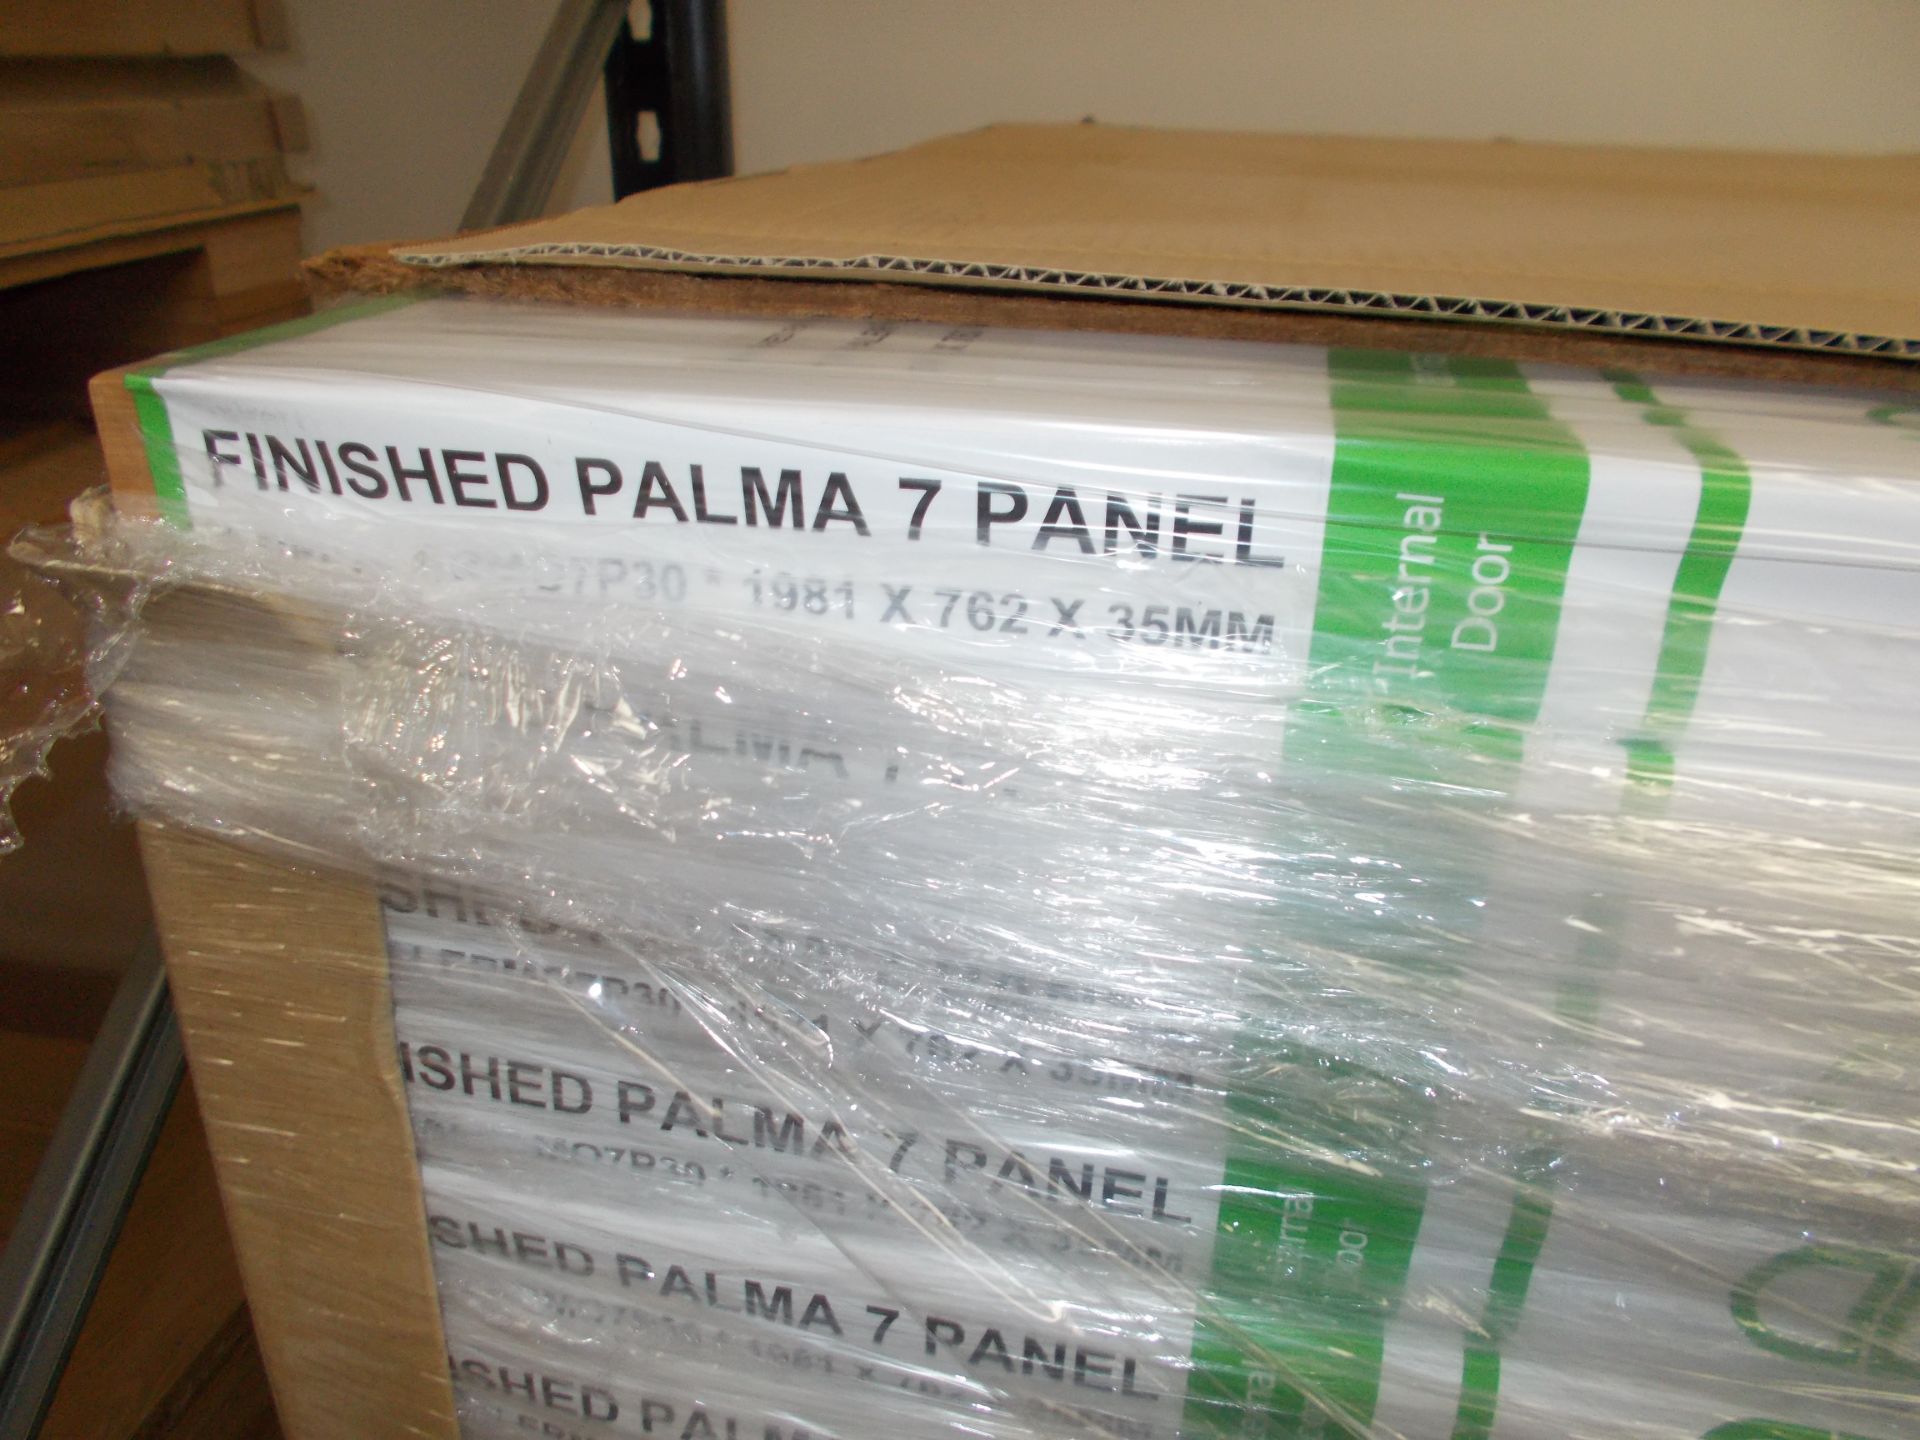 6 x Finished Palma 7 Panel Internal Door PFPALERMO7P30 1981x762x35mm - Lots to be handed out in - Image 3 of 3